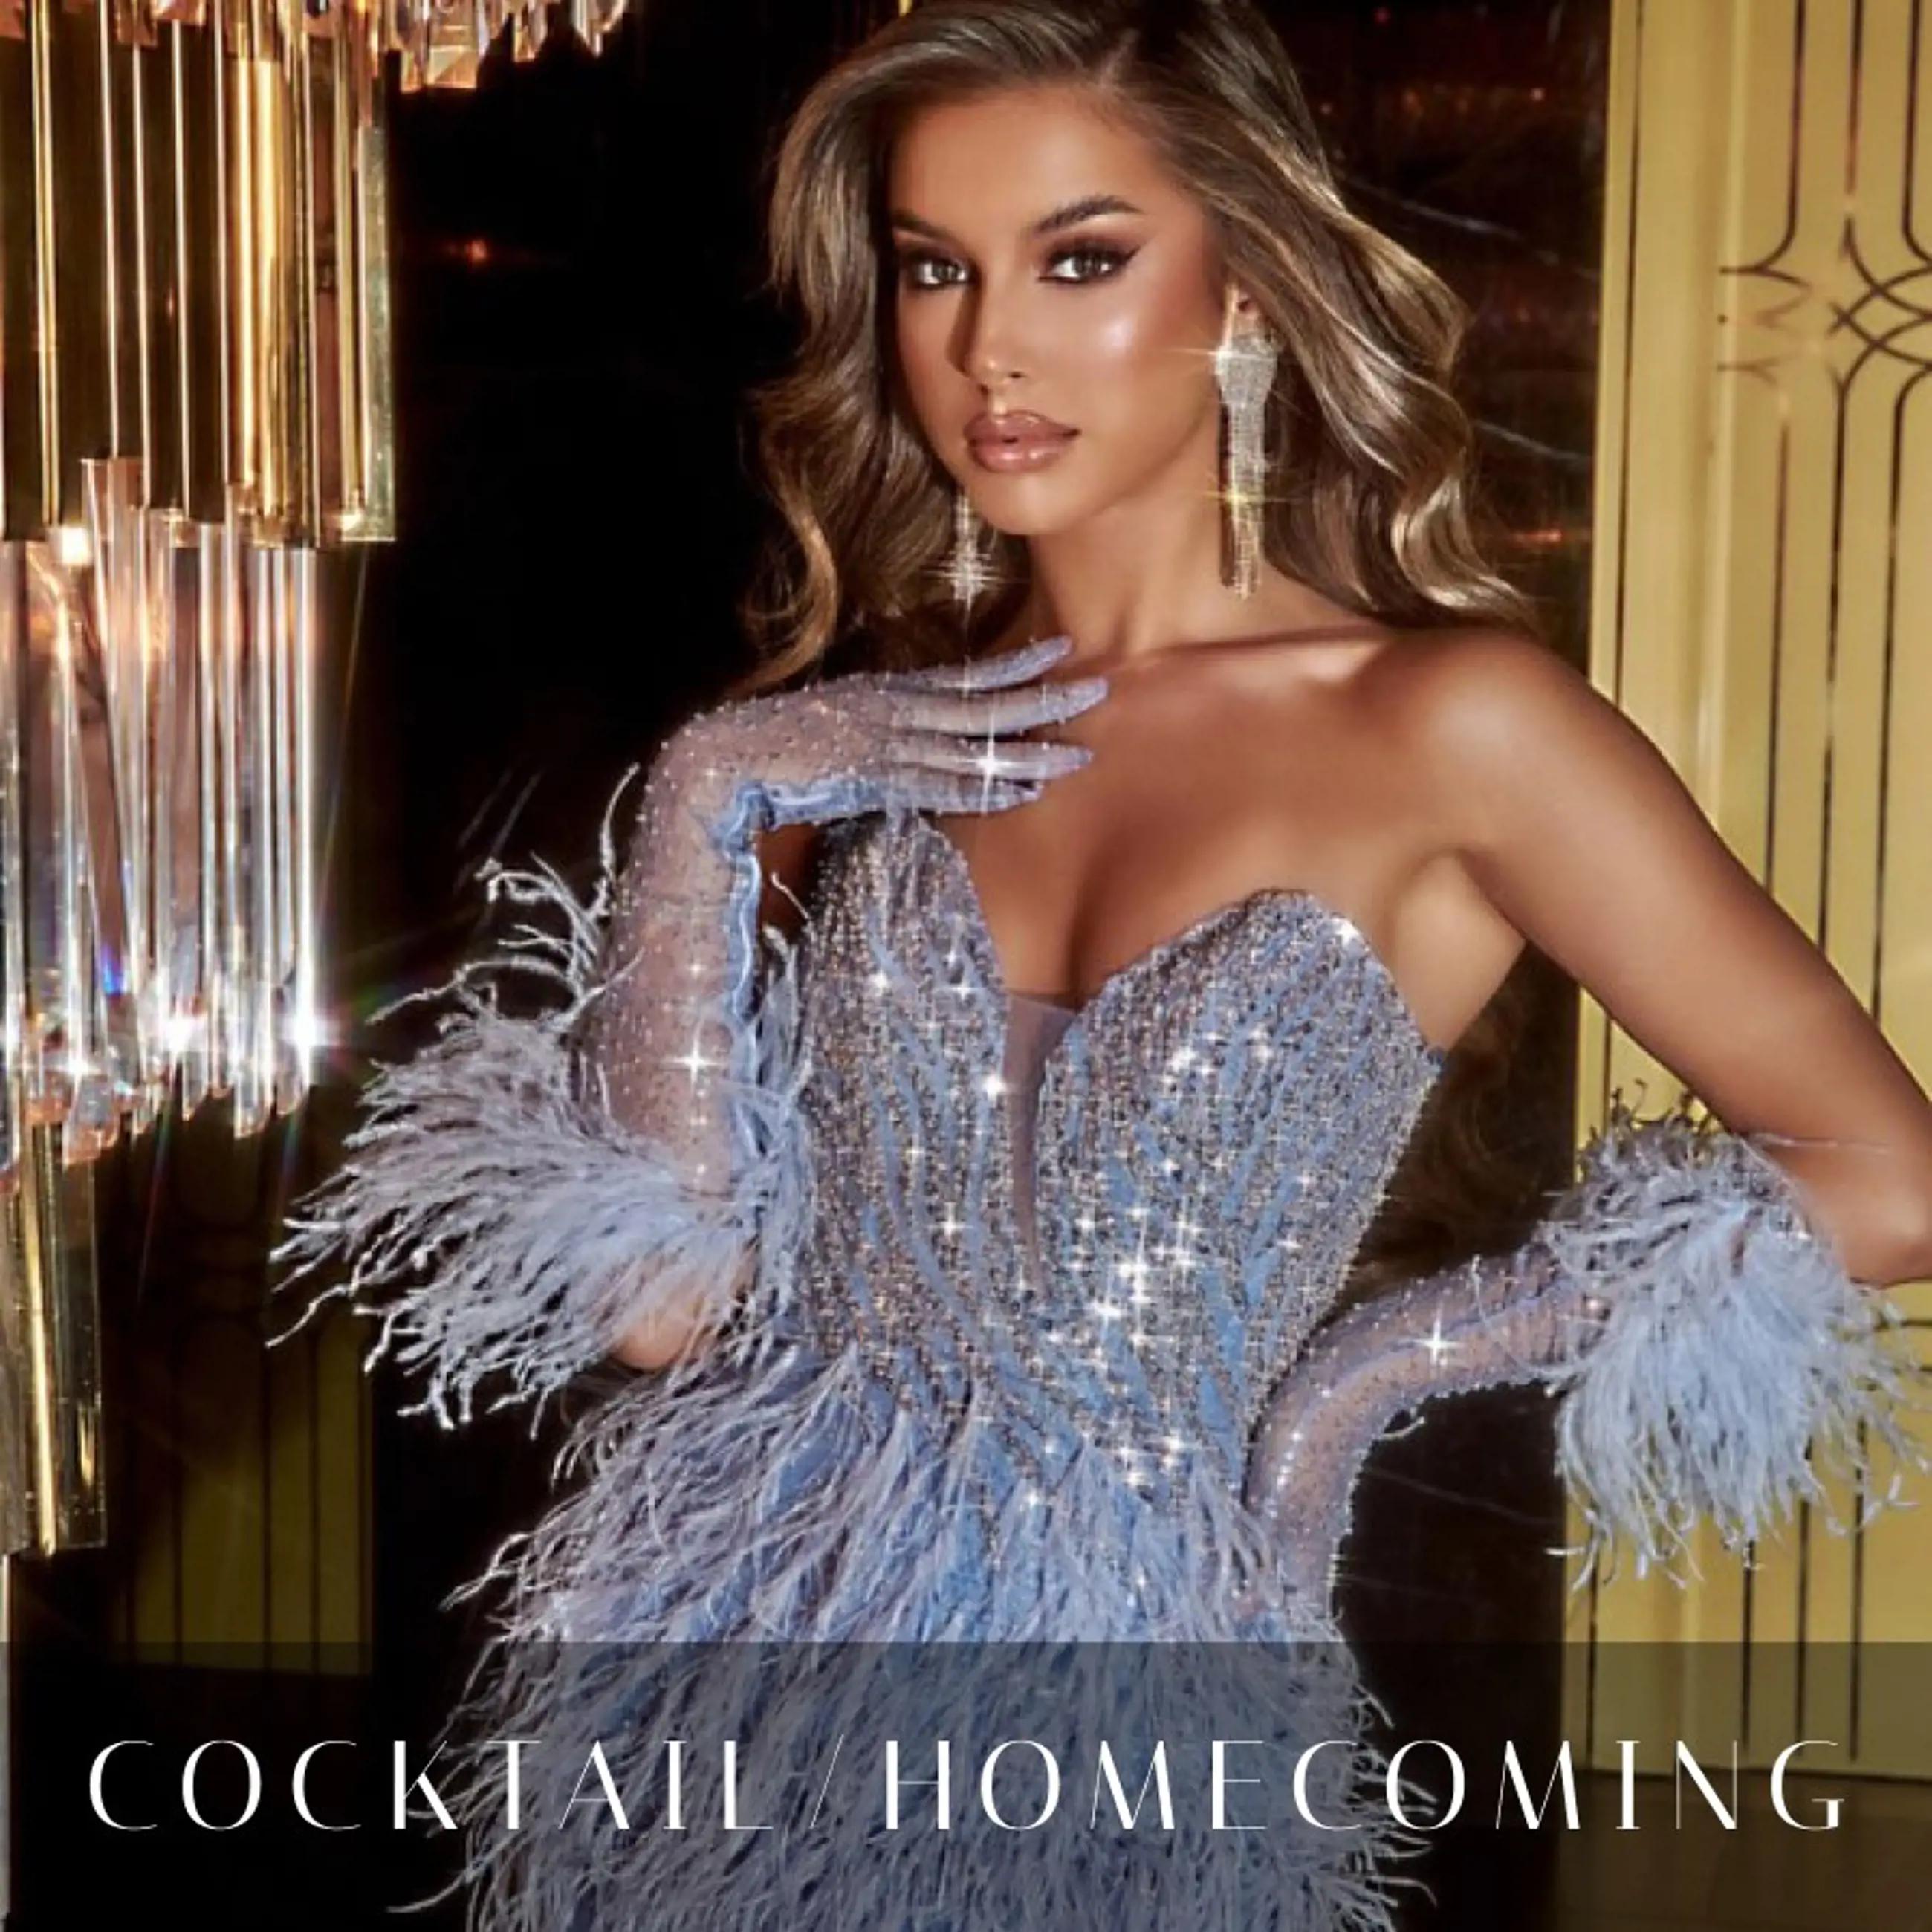 Cocktail-homecoming